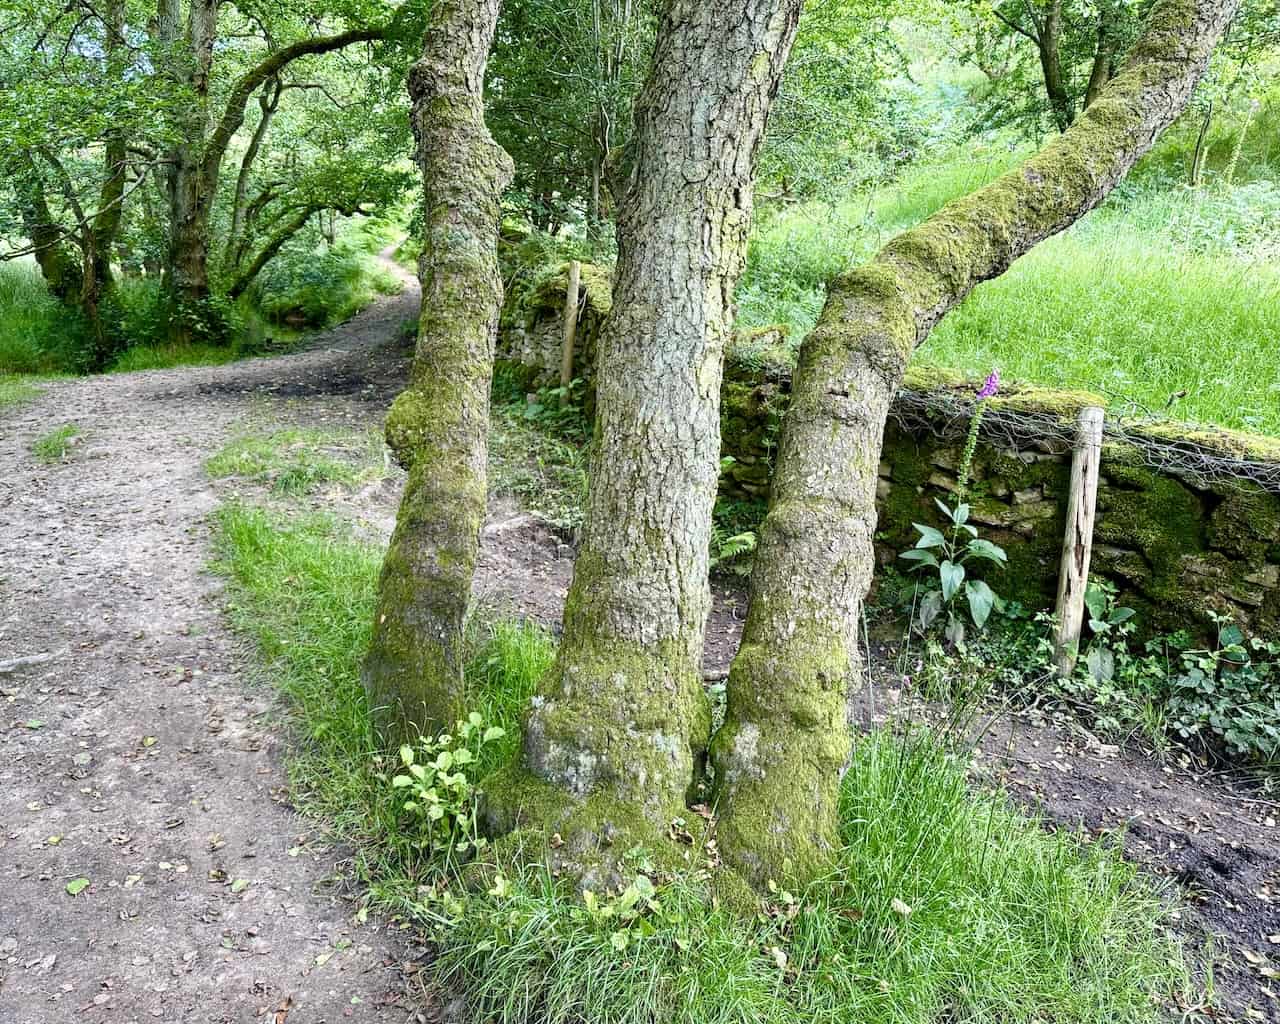 Path continuing north from the picnic area along the side of a moss-covered dry stone wall, with three trees pointing the way.